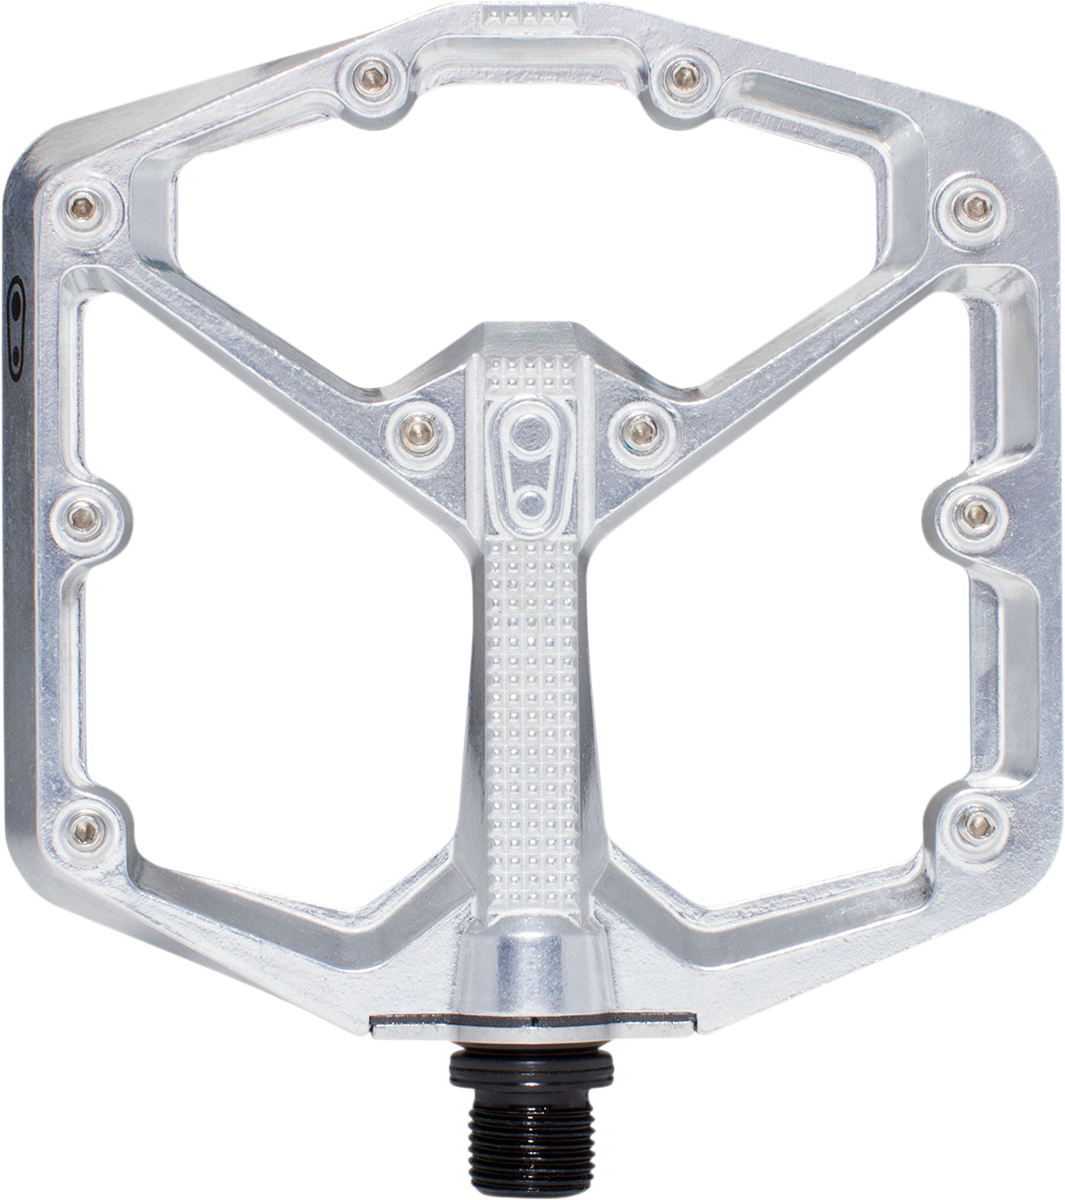 Stamp 7 Pedals - Large - Silver